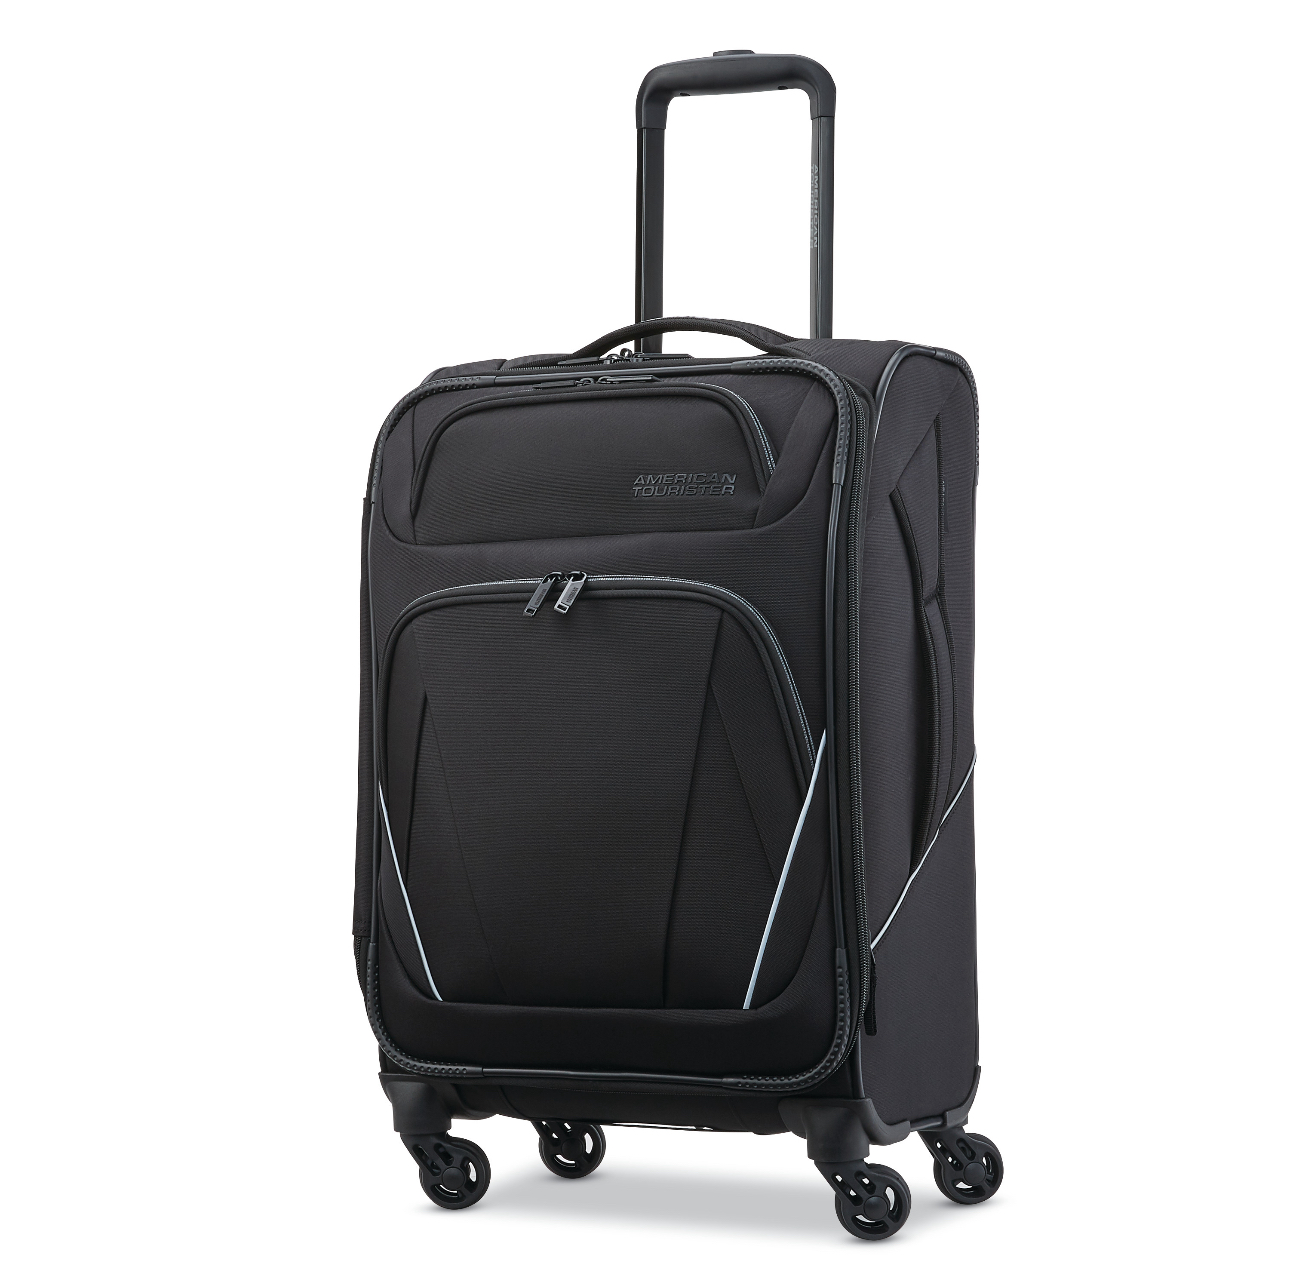 20” American Tourister Superset Softside Carry-On Spinner - $59.99